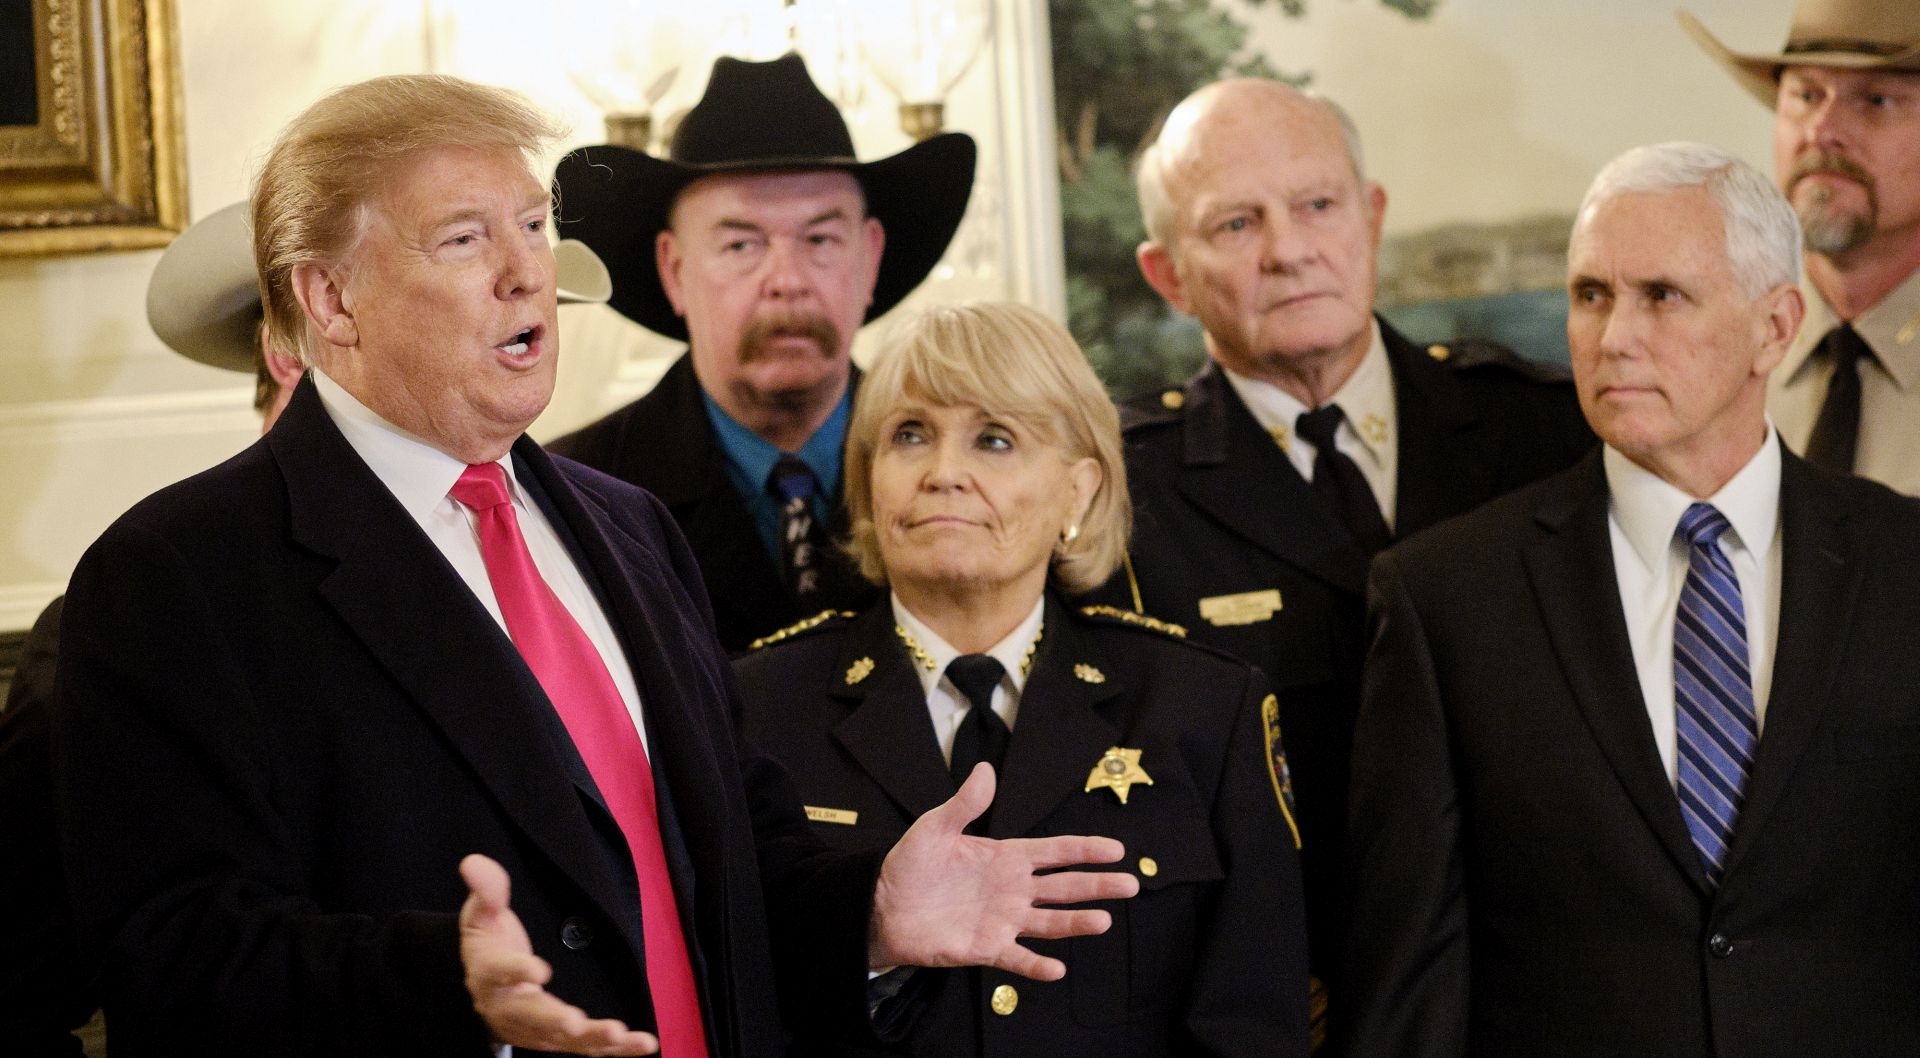 epa07363174 US President Donald J. Trump (L), with US Vice President Mike Pence (R), speaks to the press after meeting with sheriffs from across the country before departing for a rally in Texas, in the Diplomatic Reception Room at the White House in Washington, DC, USA, on 11 February 2019.  EPA/T.J. Kirkpatrick / Bloomberg POOL